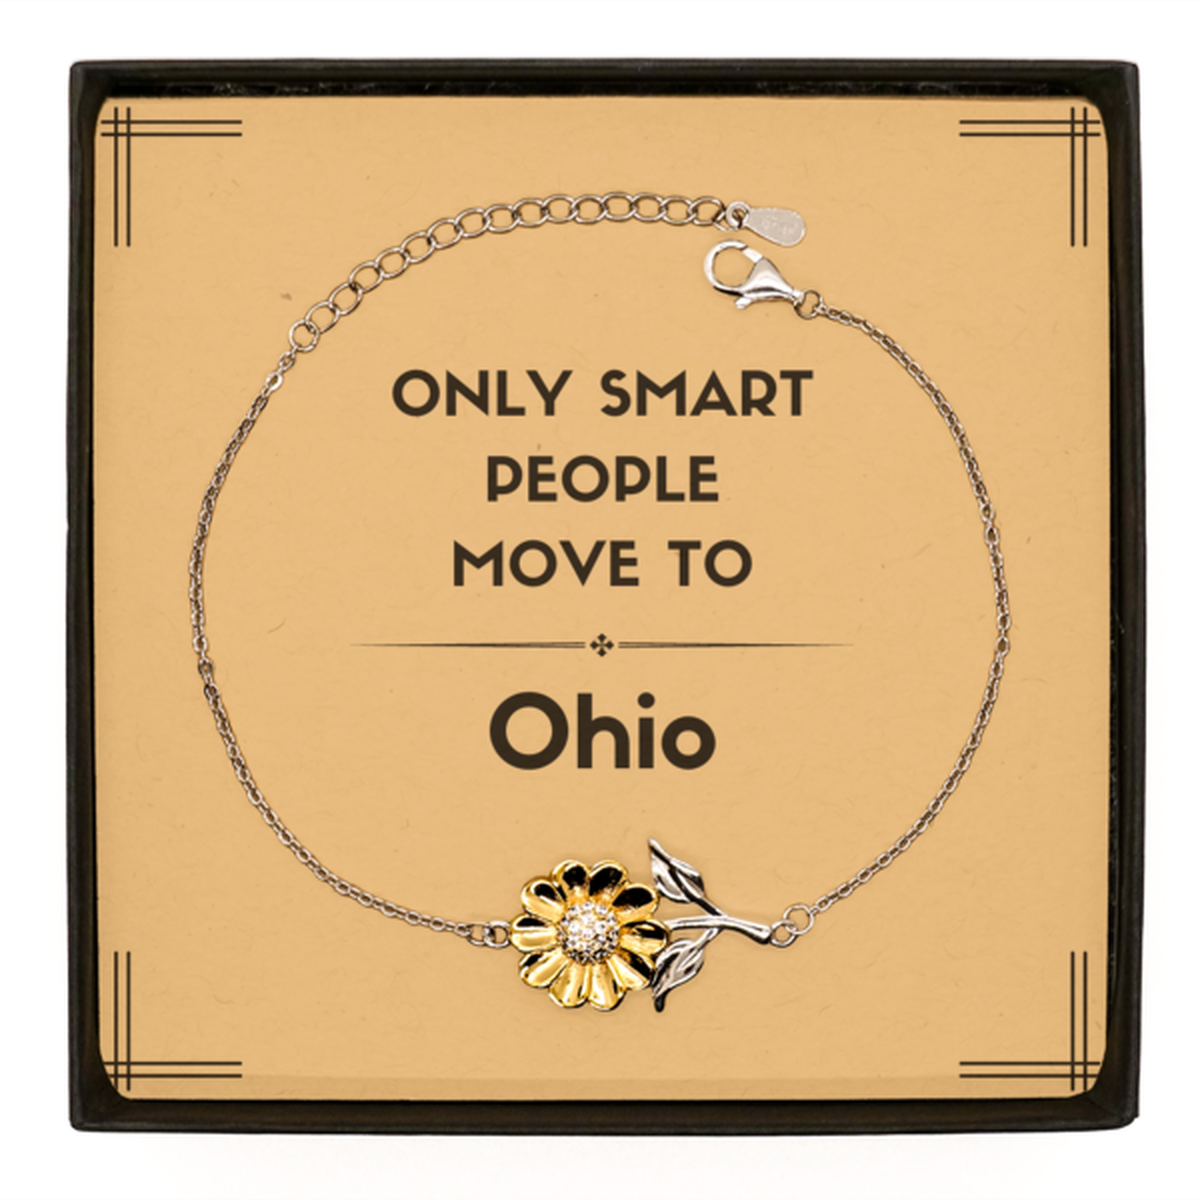 Only smart people move to Ohio Sunflower Bracelet, Message Card Gifts For Ohio, Move to Ohio Gifts for Friends Coworker Funny Saying Quote